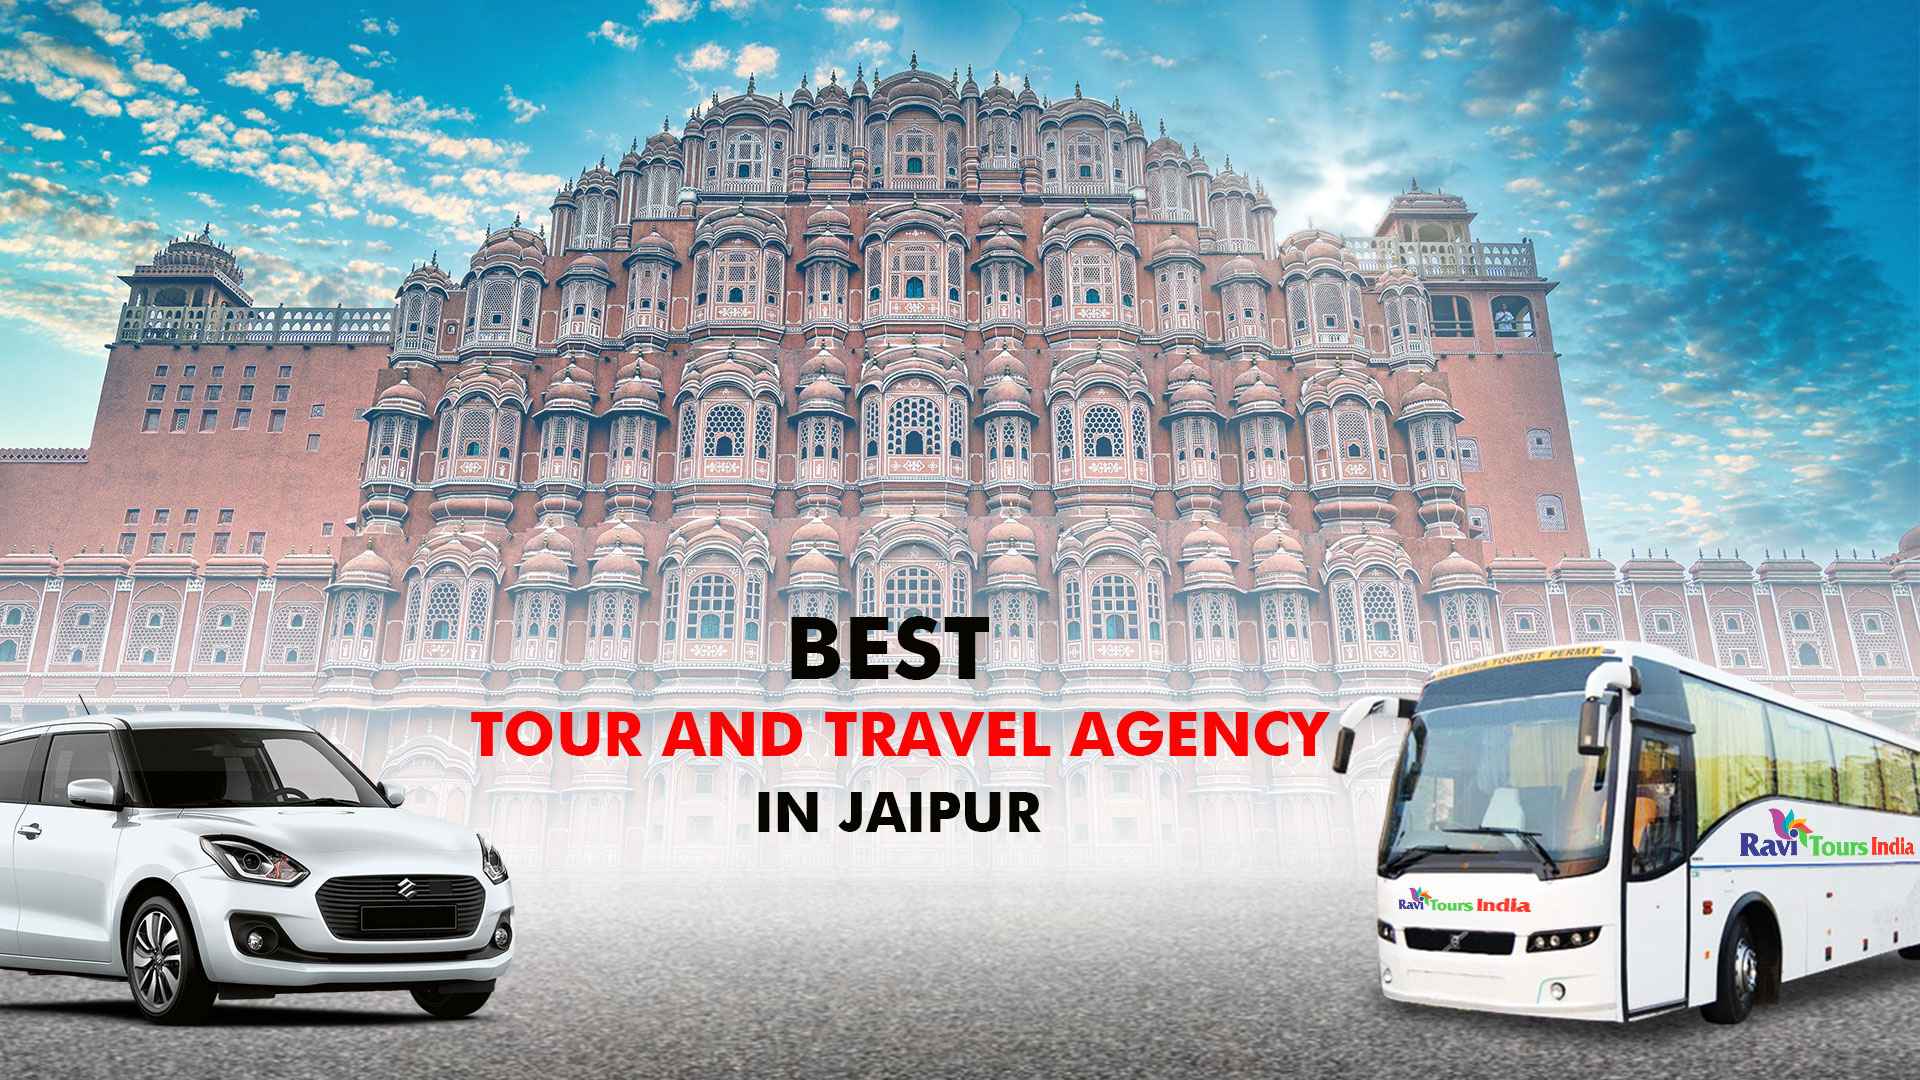 ravi tours and travels